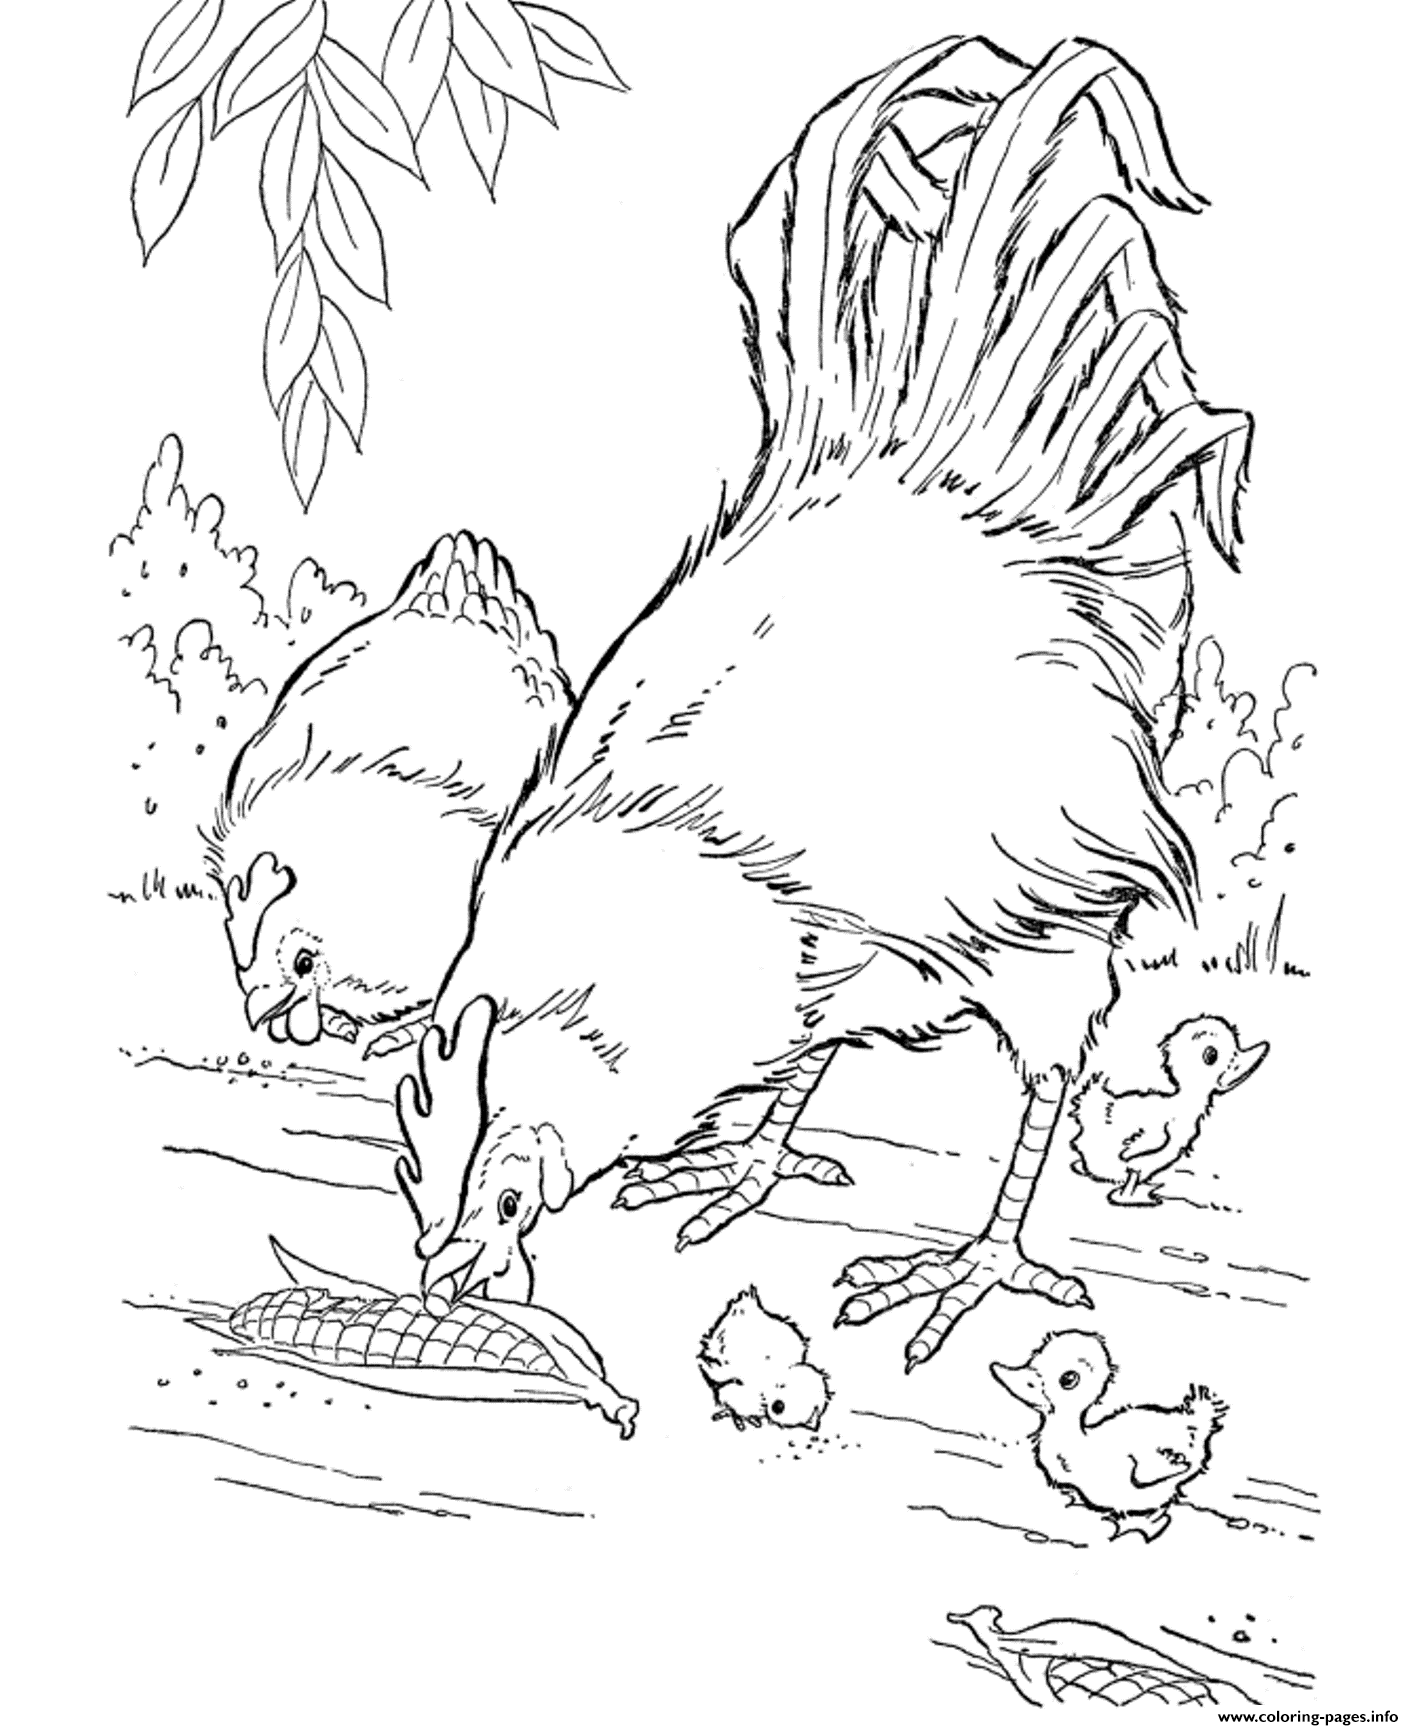 Print realistic hen and rooster farm animal scc coloring pages farm coloring pages farm animal coloring pages chicken coloring pages